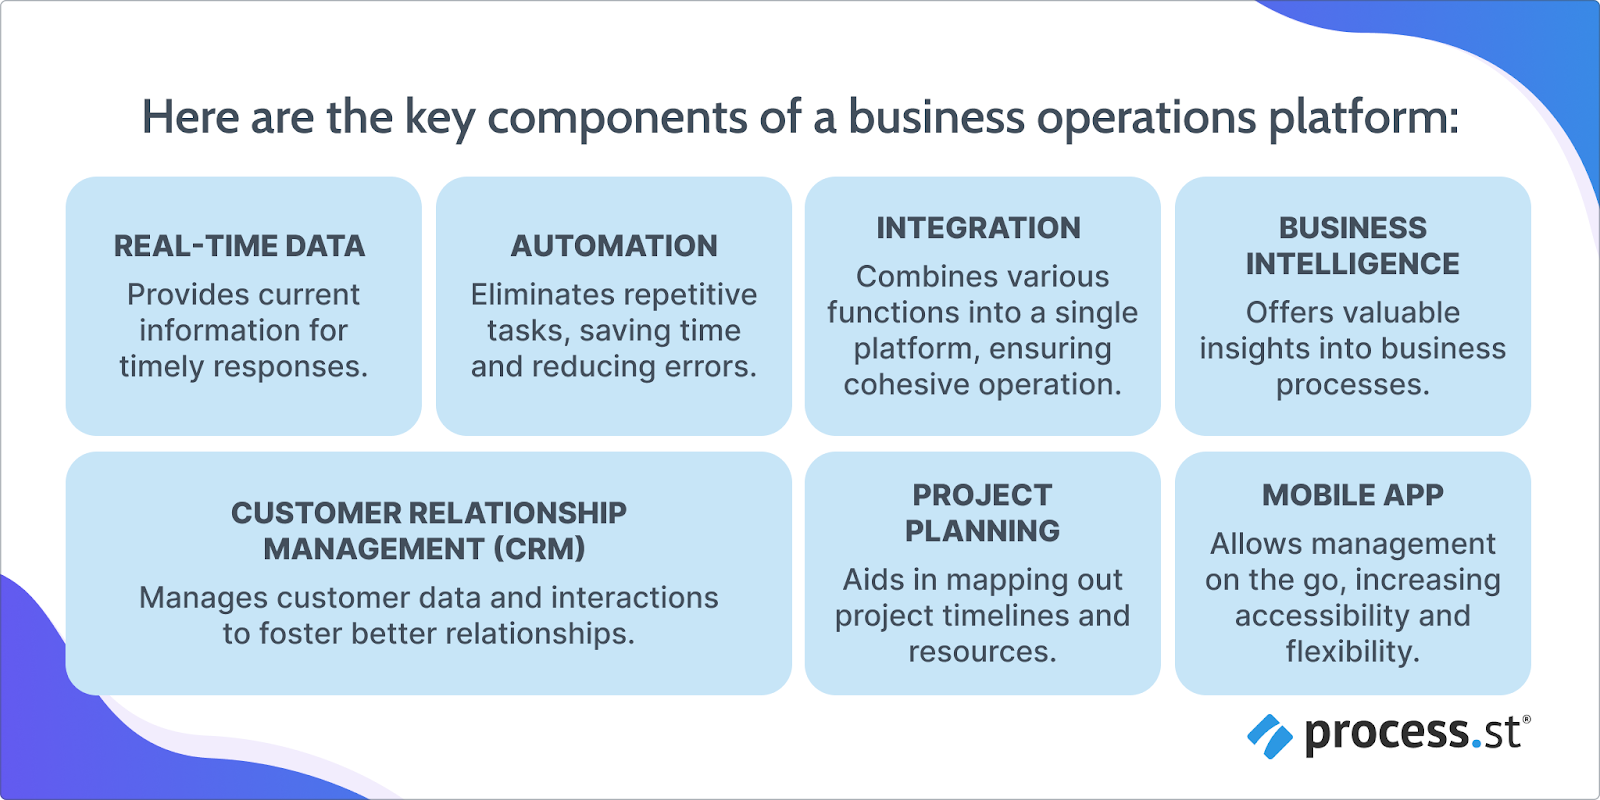 Image showing the key components of a business operations platform